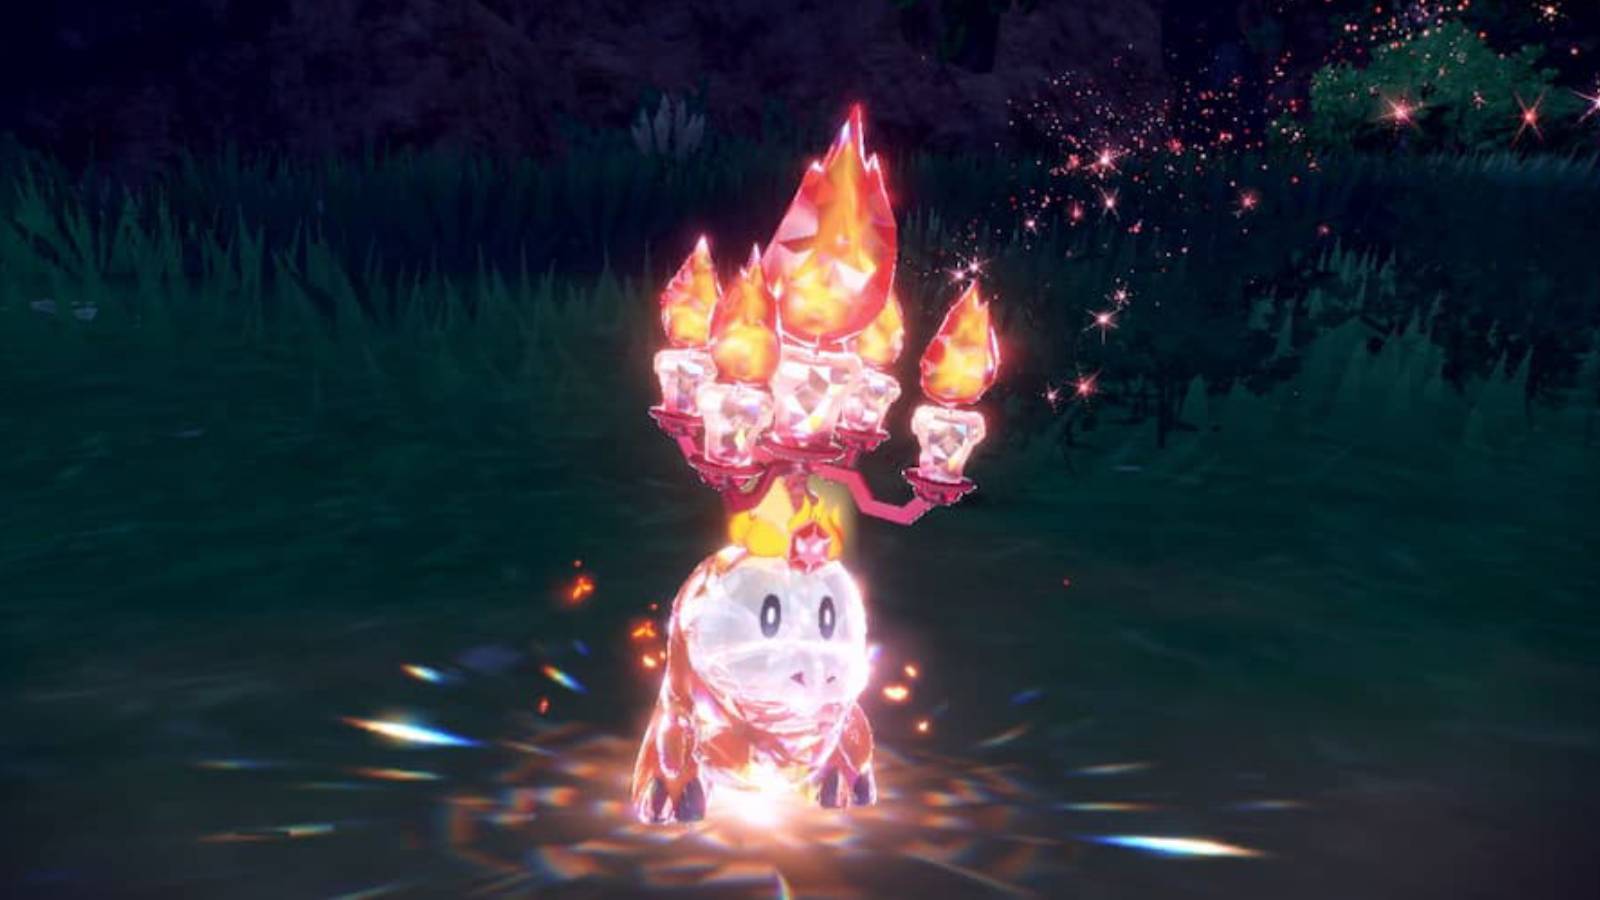 The Pokemon Fuecoco appears in the Tera fire form